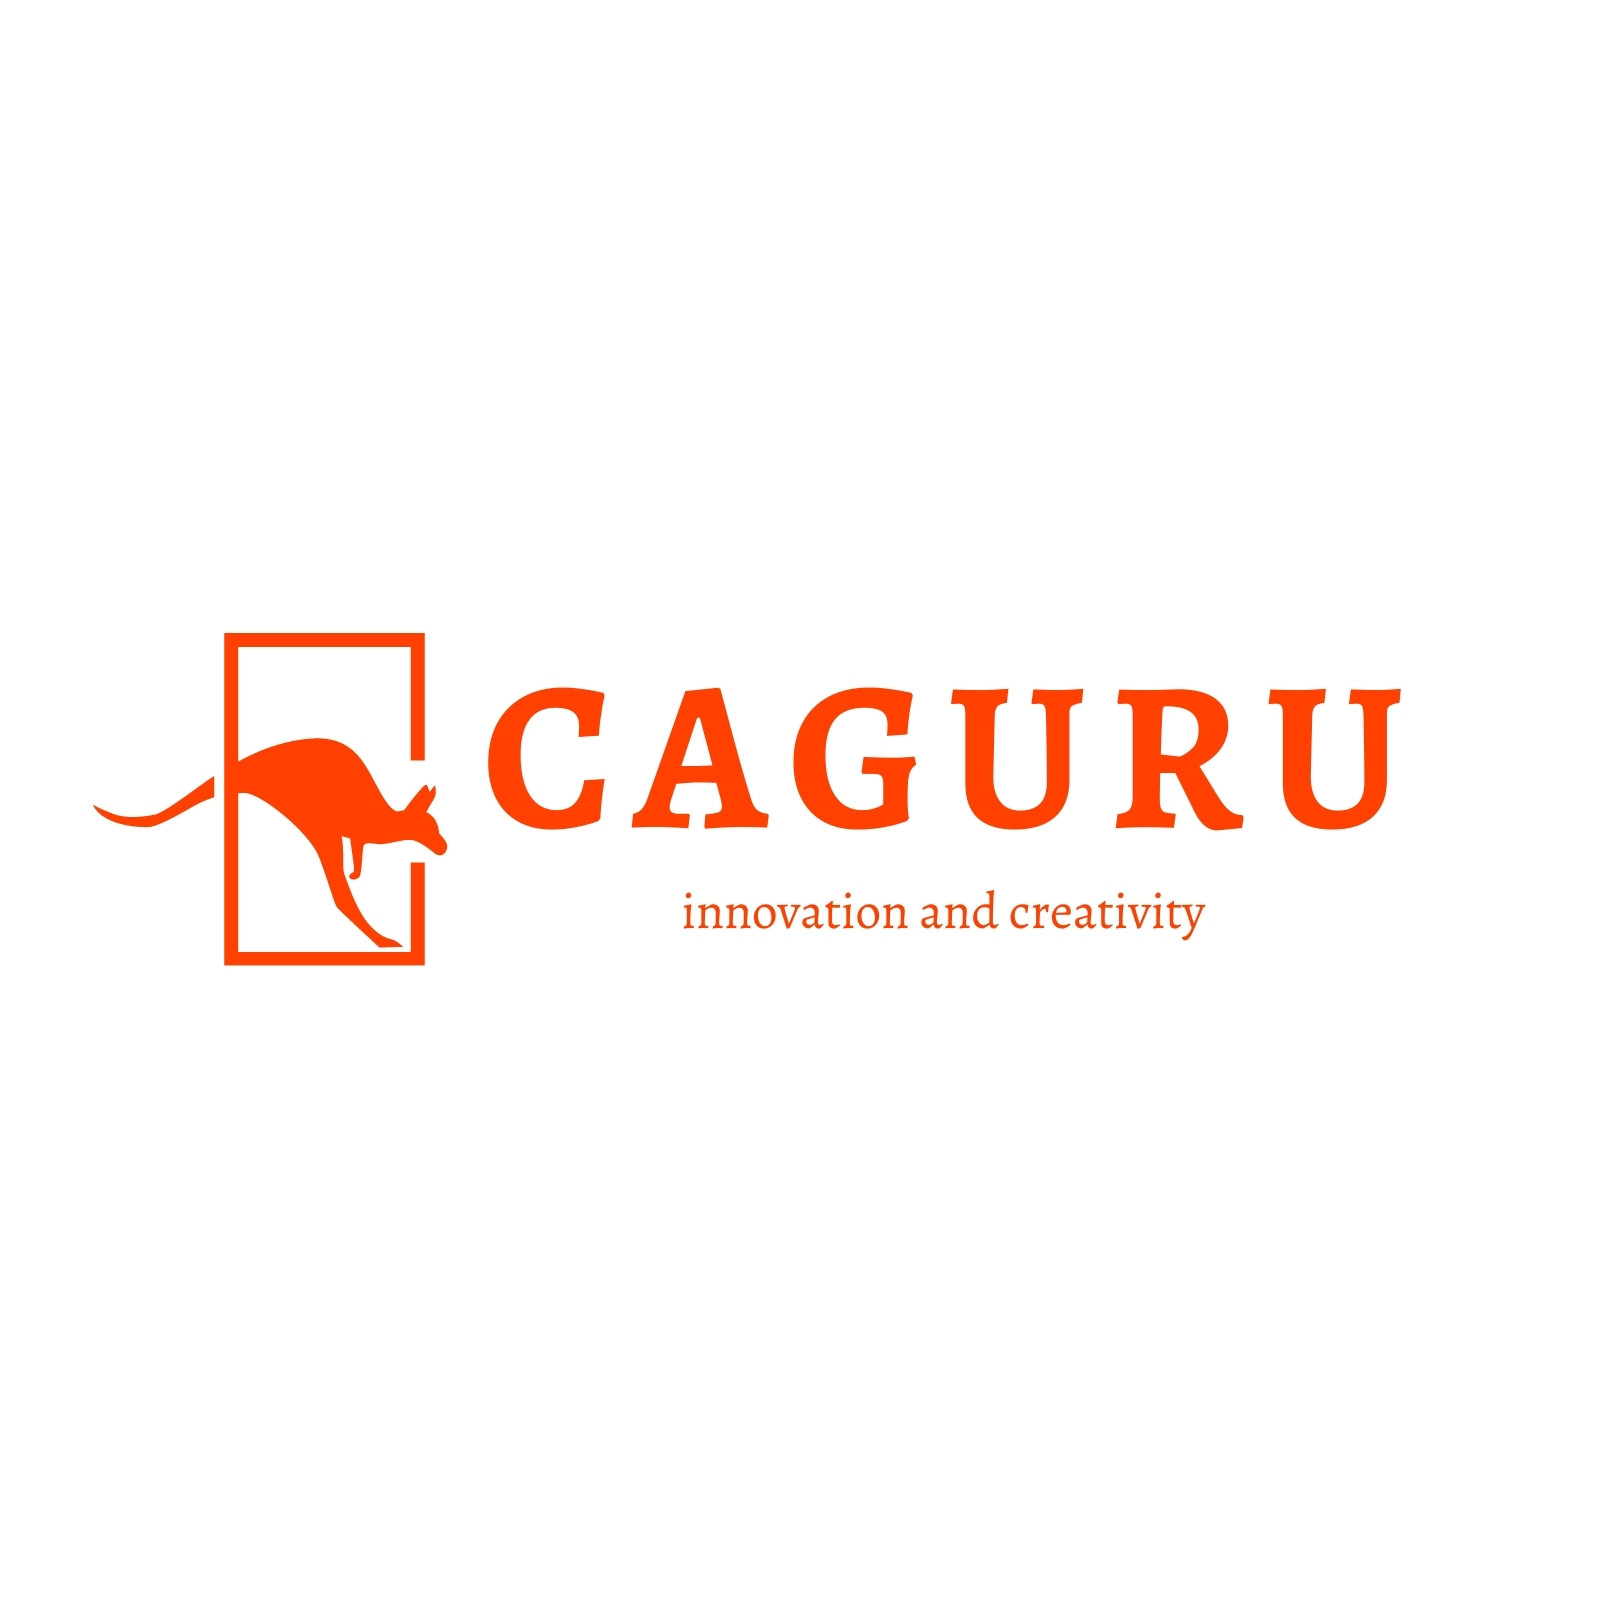 All posts by Caguuu